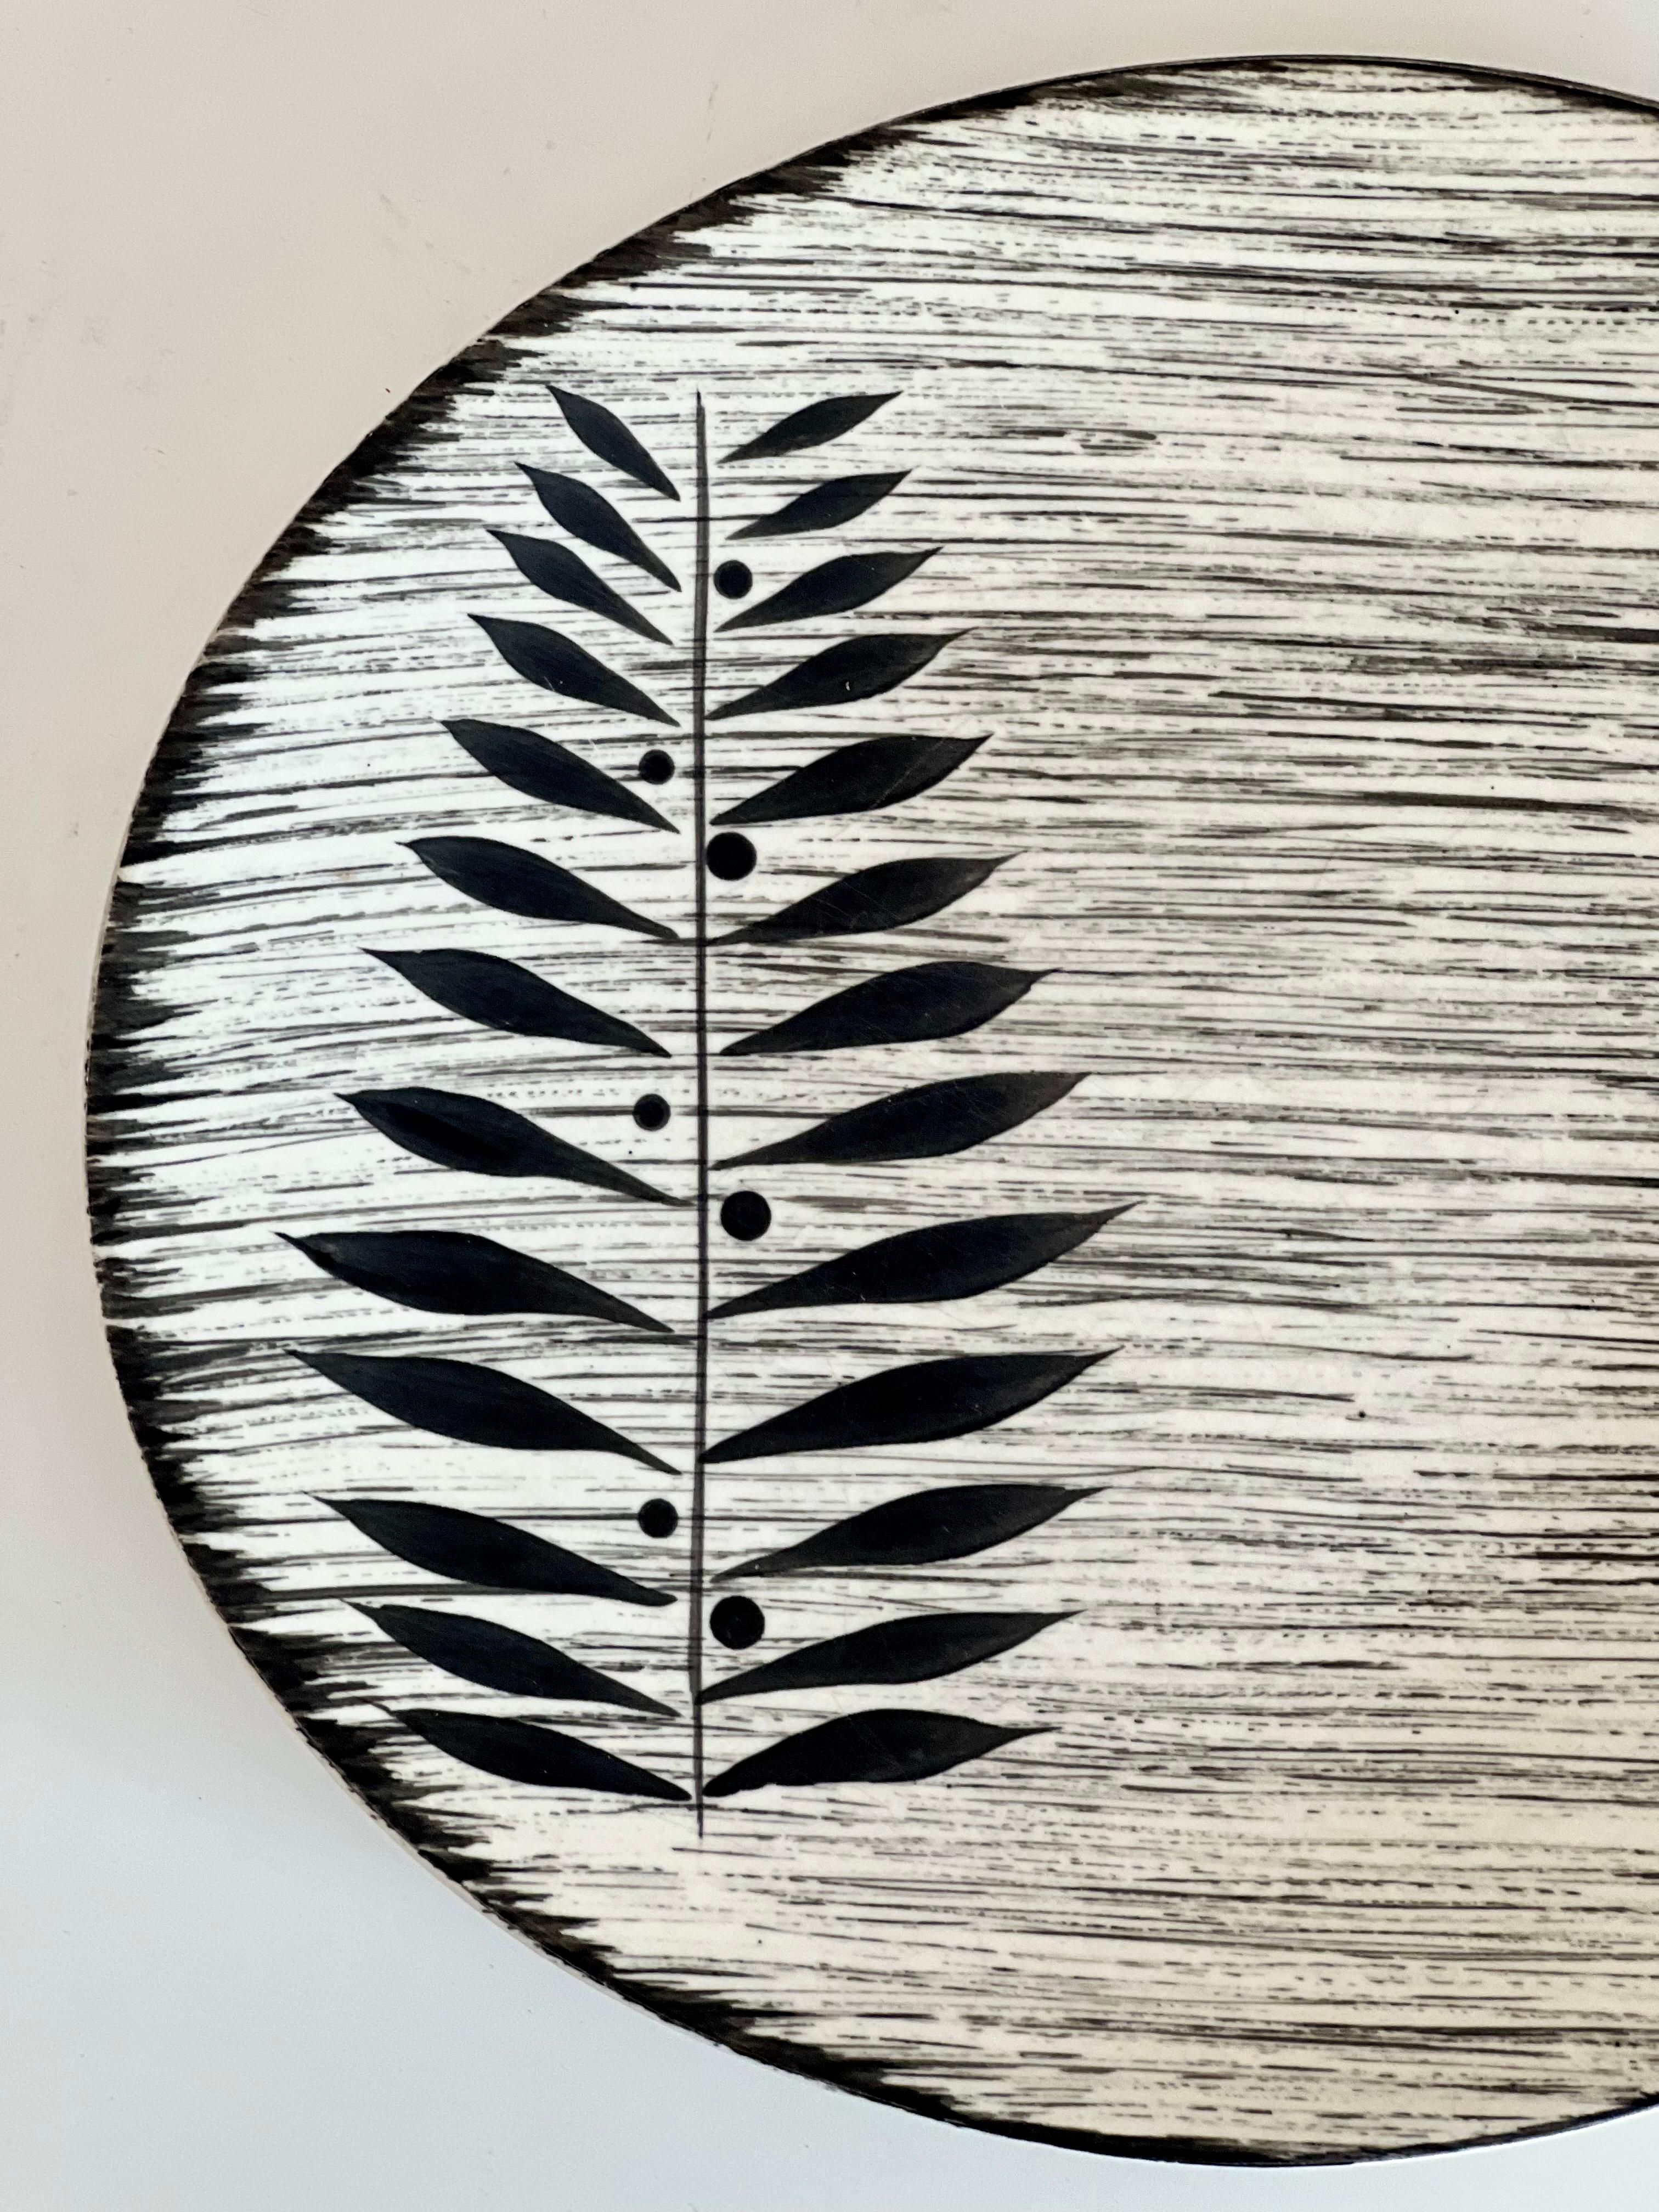 A series of 6 ceramic platters, signed Salins, Toledo model.
From the 60s
Very trendy in black and white
fern pattern. 
Every plate is unique and the fern pattern differs slightly. 
manufacture of salins les bains. TOLEDO model